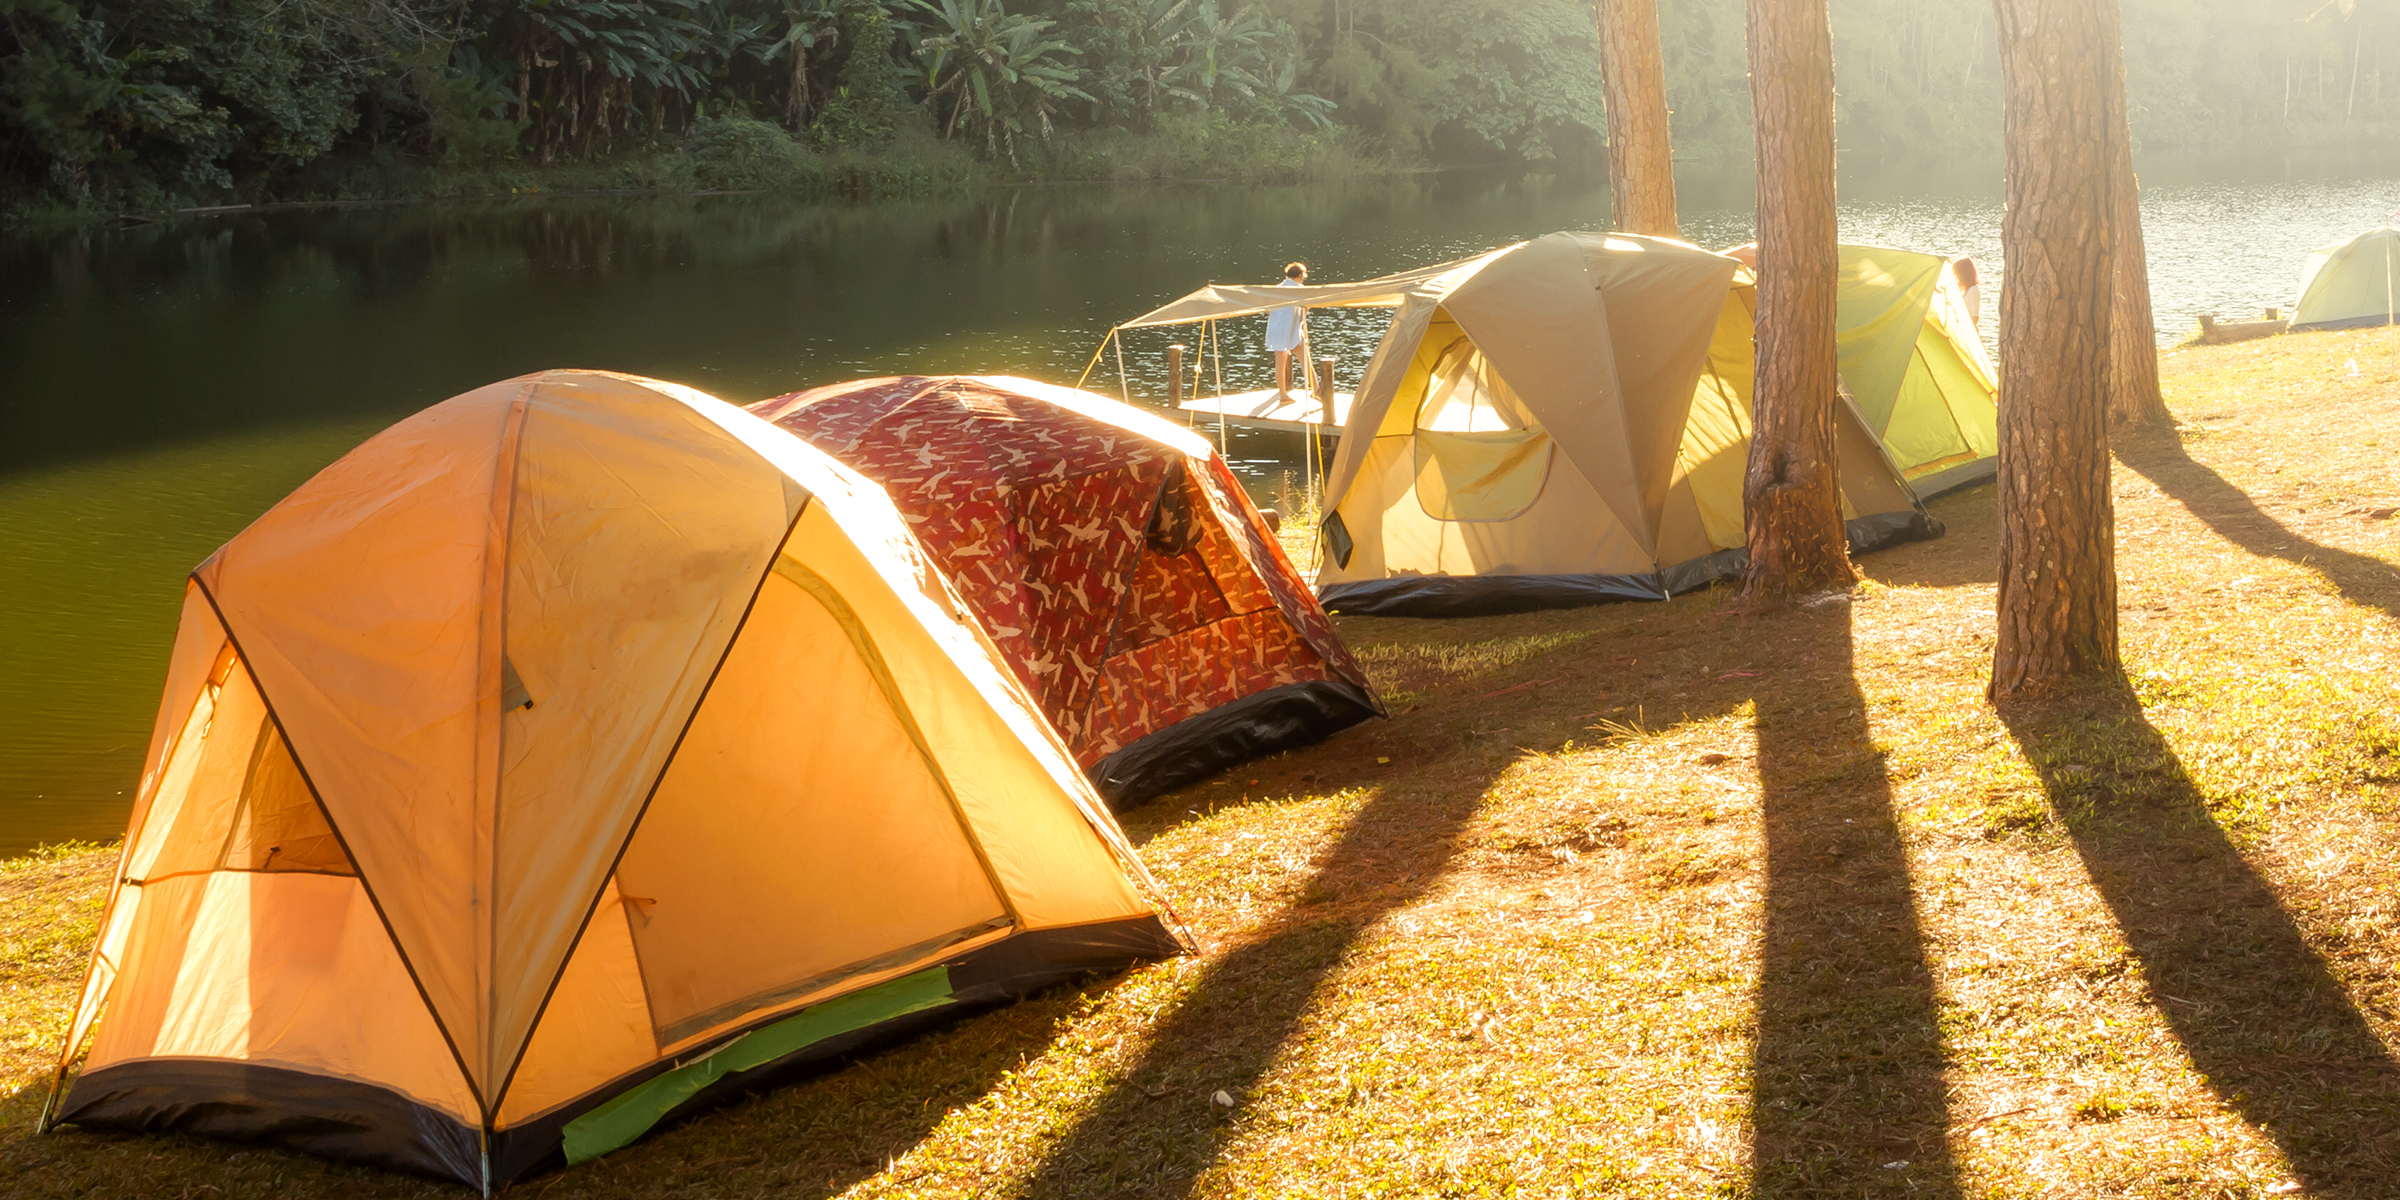 Tents pitched under trees | Source: Shutterstock